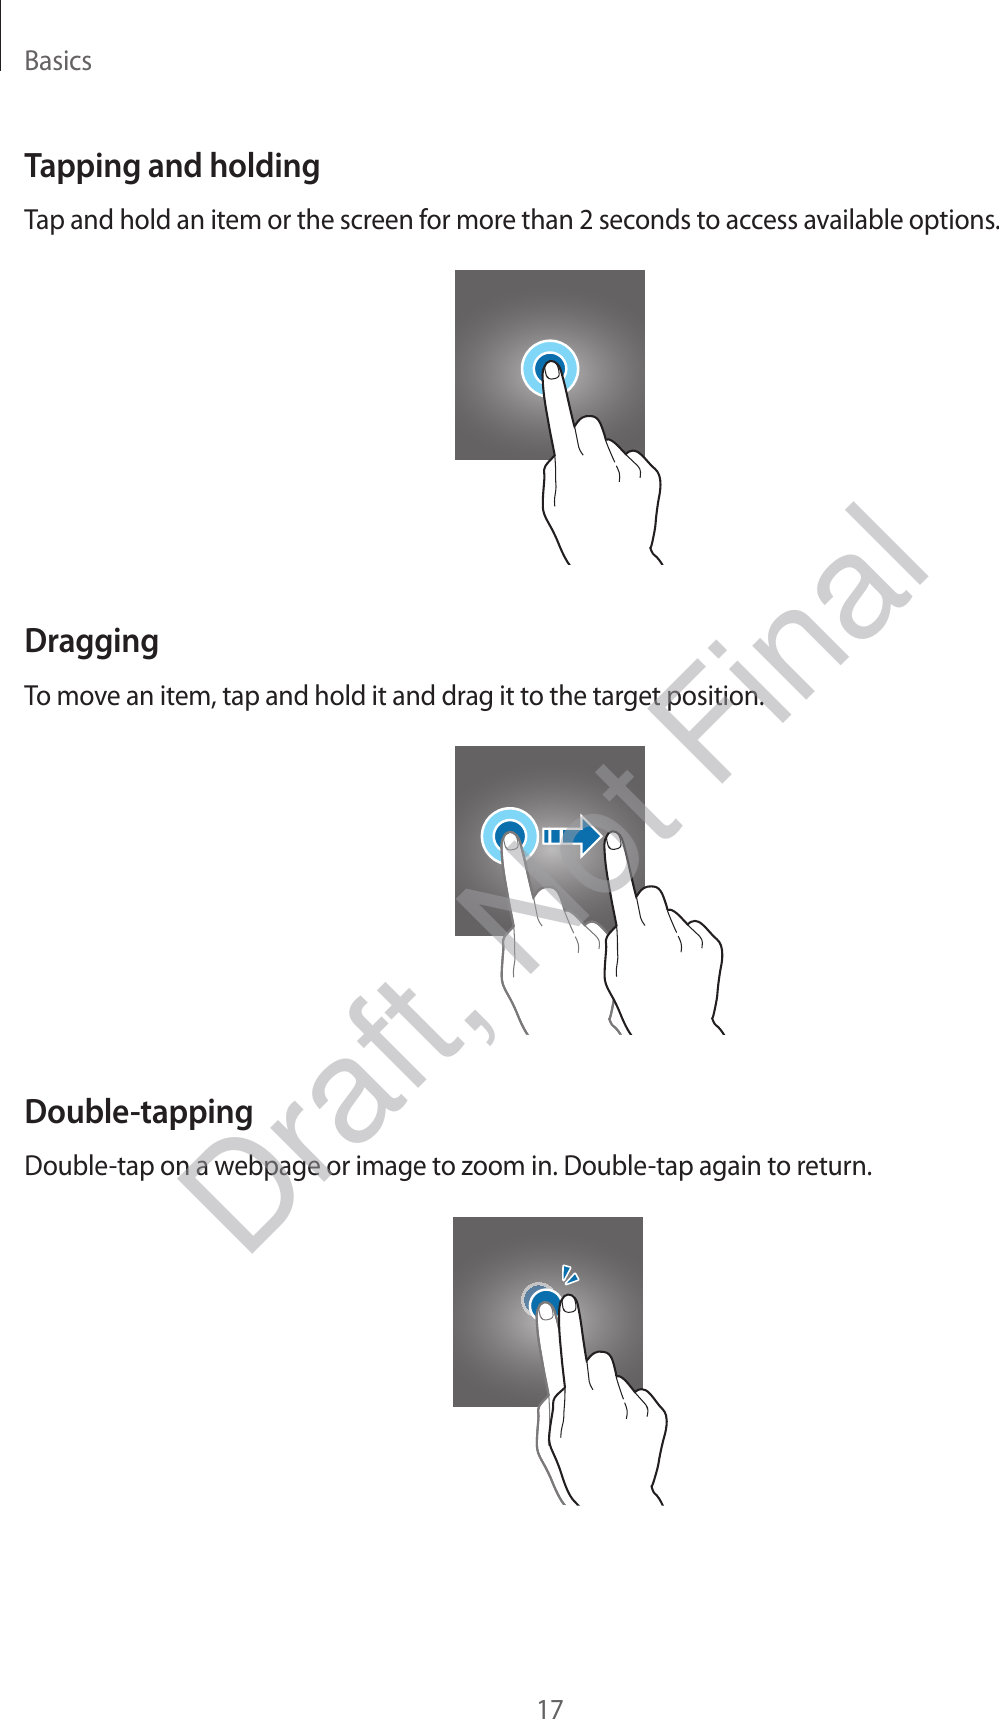 Basics17Tapping and holdingTap and hold an item or the screen for more than 2 seconds to access available options.DraggingTo move an item, tap and hold it and drag it to the target position.Double-tappingDouble-tap on a webpage or image to zoom in. Double-tap again to return.Draft, Not Final